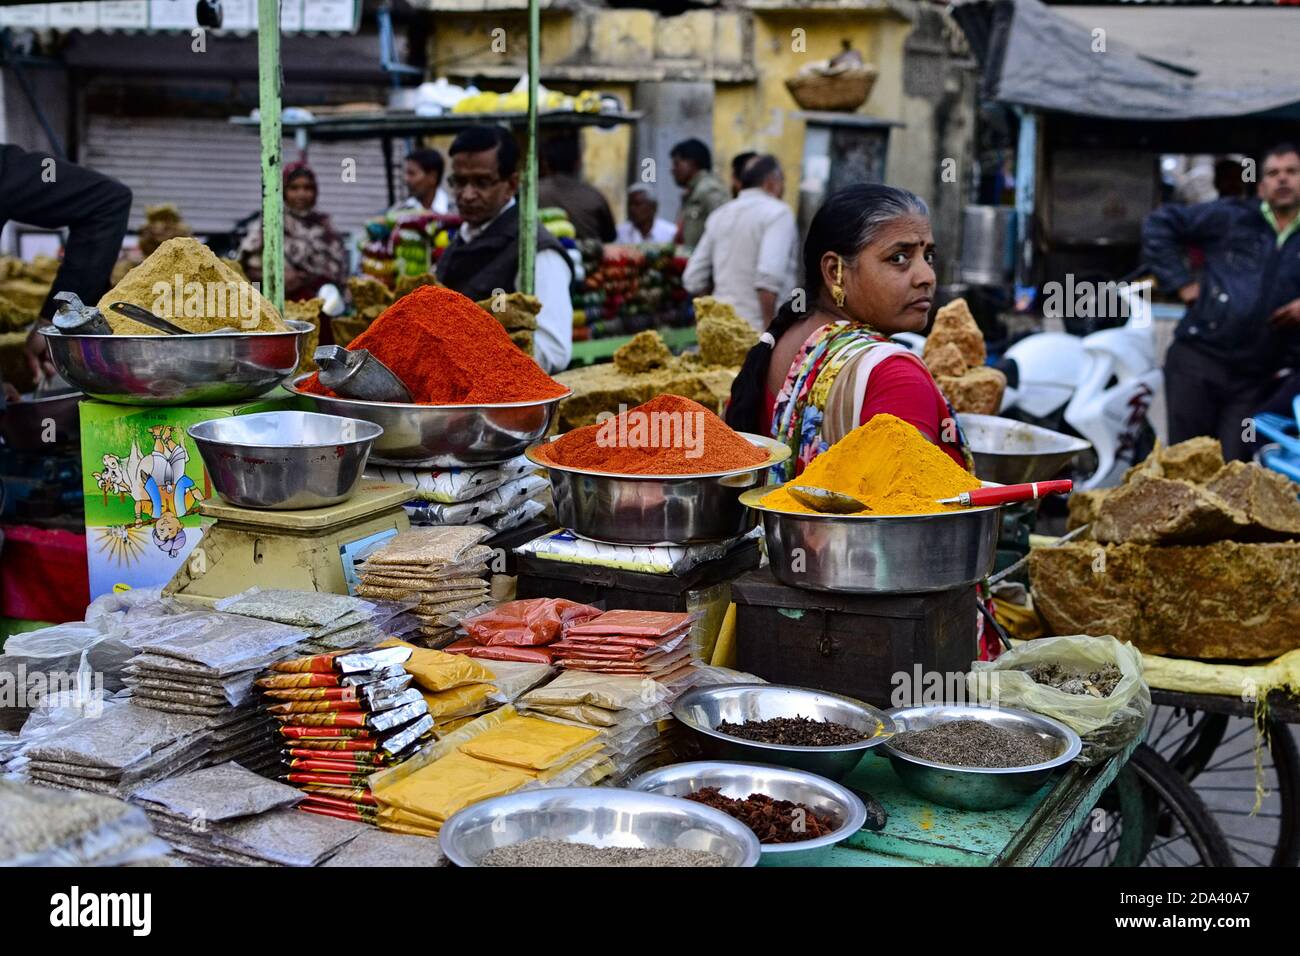 Udaipur, Rajasthan, India - December 2016: Indian woman sells colorful spices (curcuma, curry, chili pepper powder) on the traditional street market Stock Photo